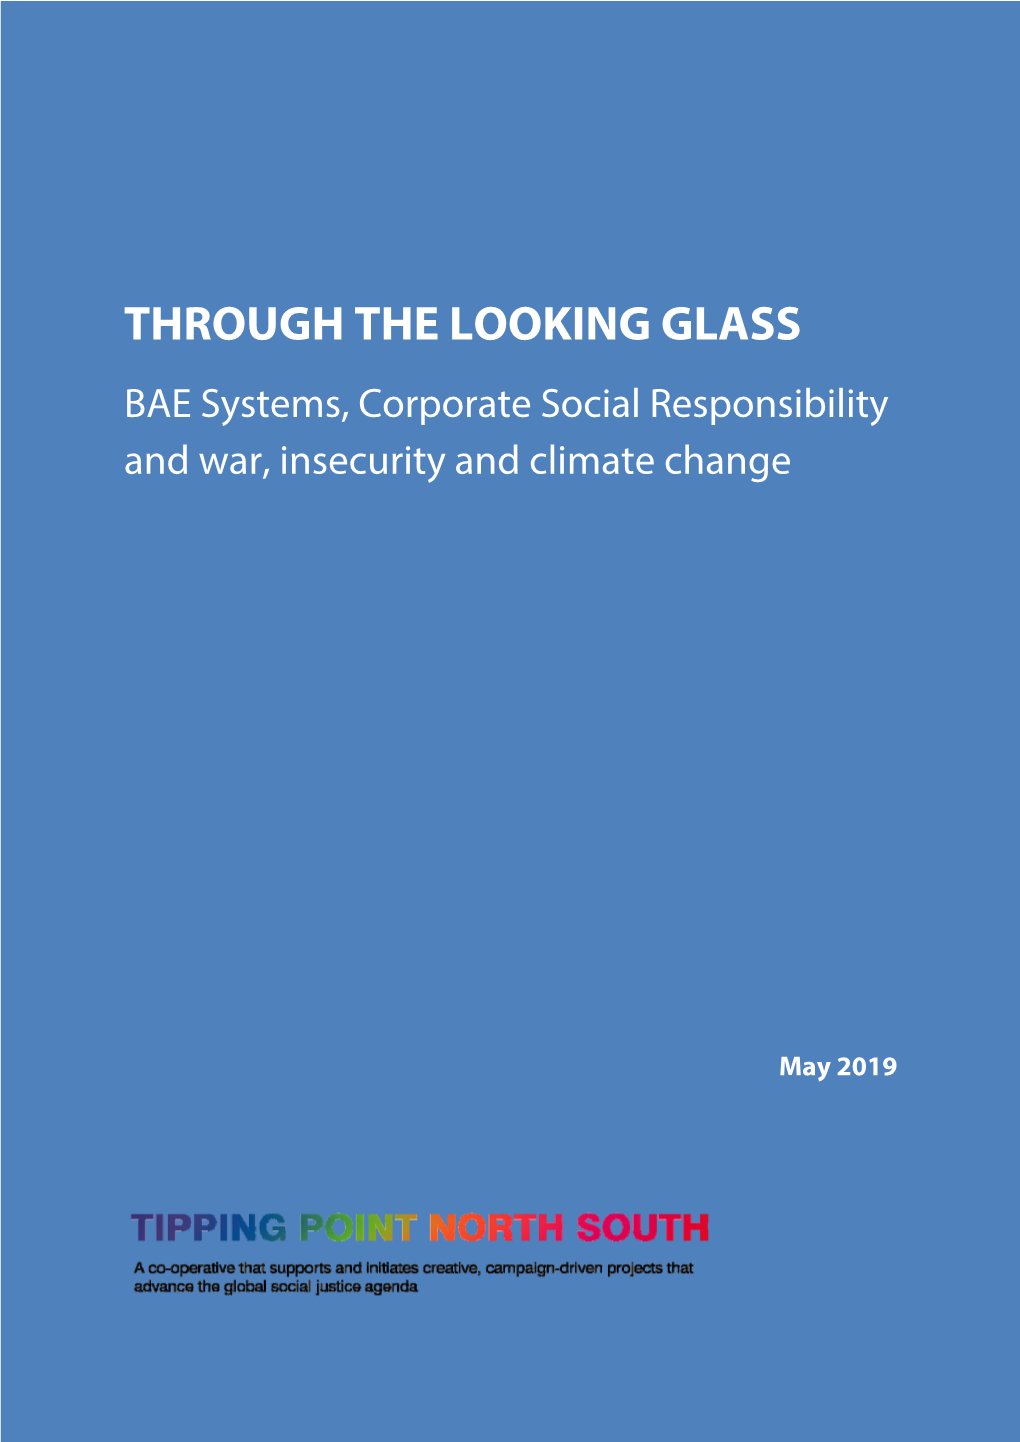 Through the Looking Glass: BAE Systems